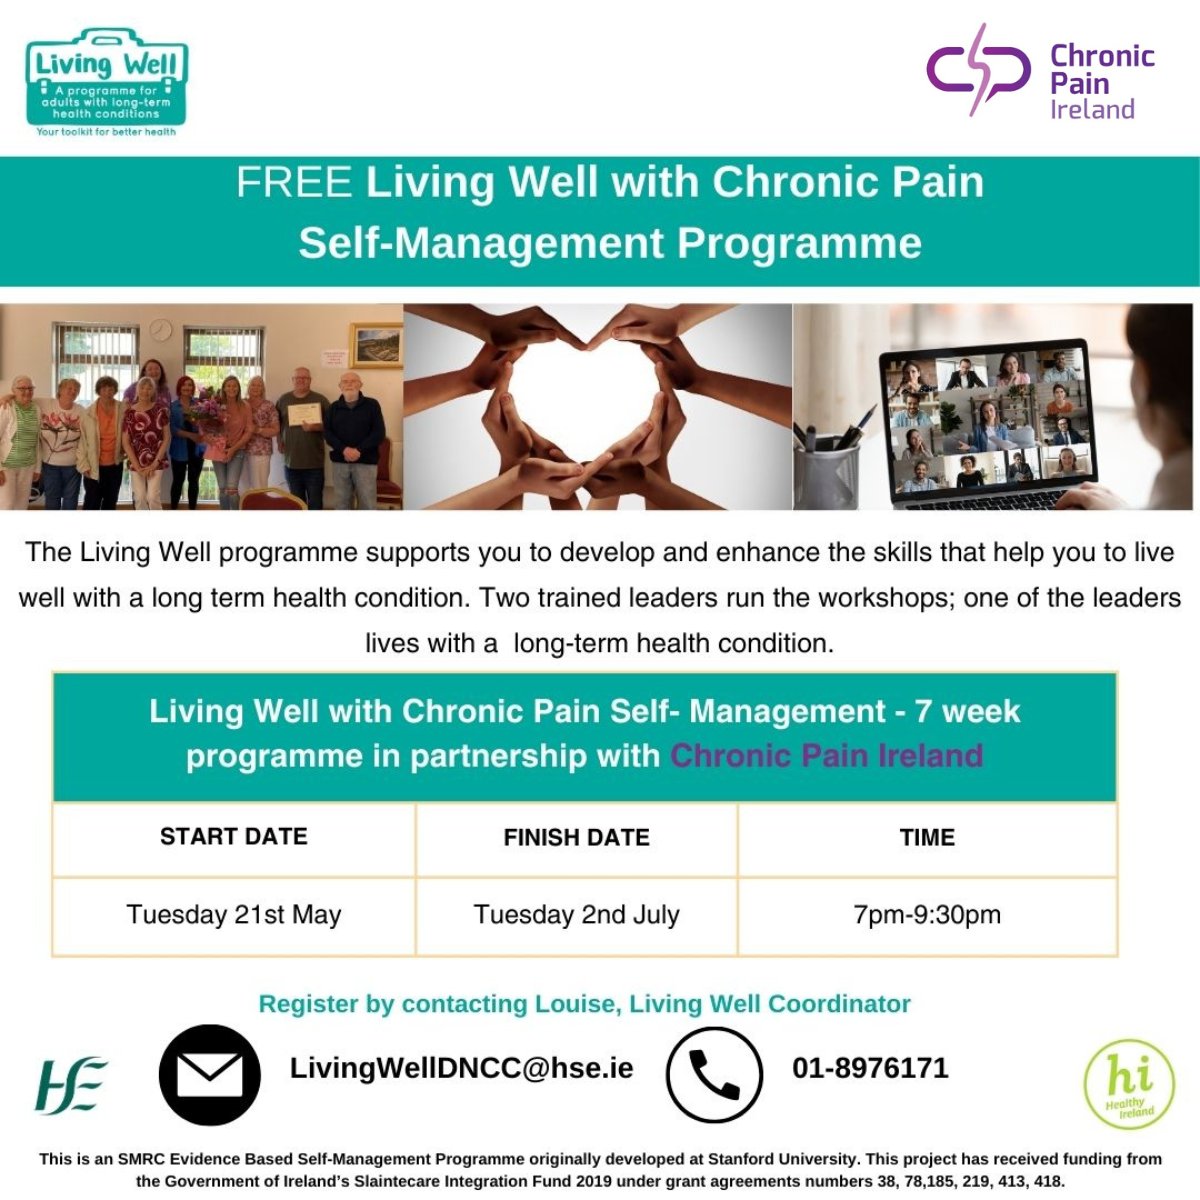 Are you living with a chronic health condition? Sign up for a free Living Well with Chronic Pain Self-Management 7-week programme in partnership with #ChronicPainIreland & enhance your knowledge and skills to better manage your health. Register: LivingWellDNCC@hse.ie @HSELive